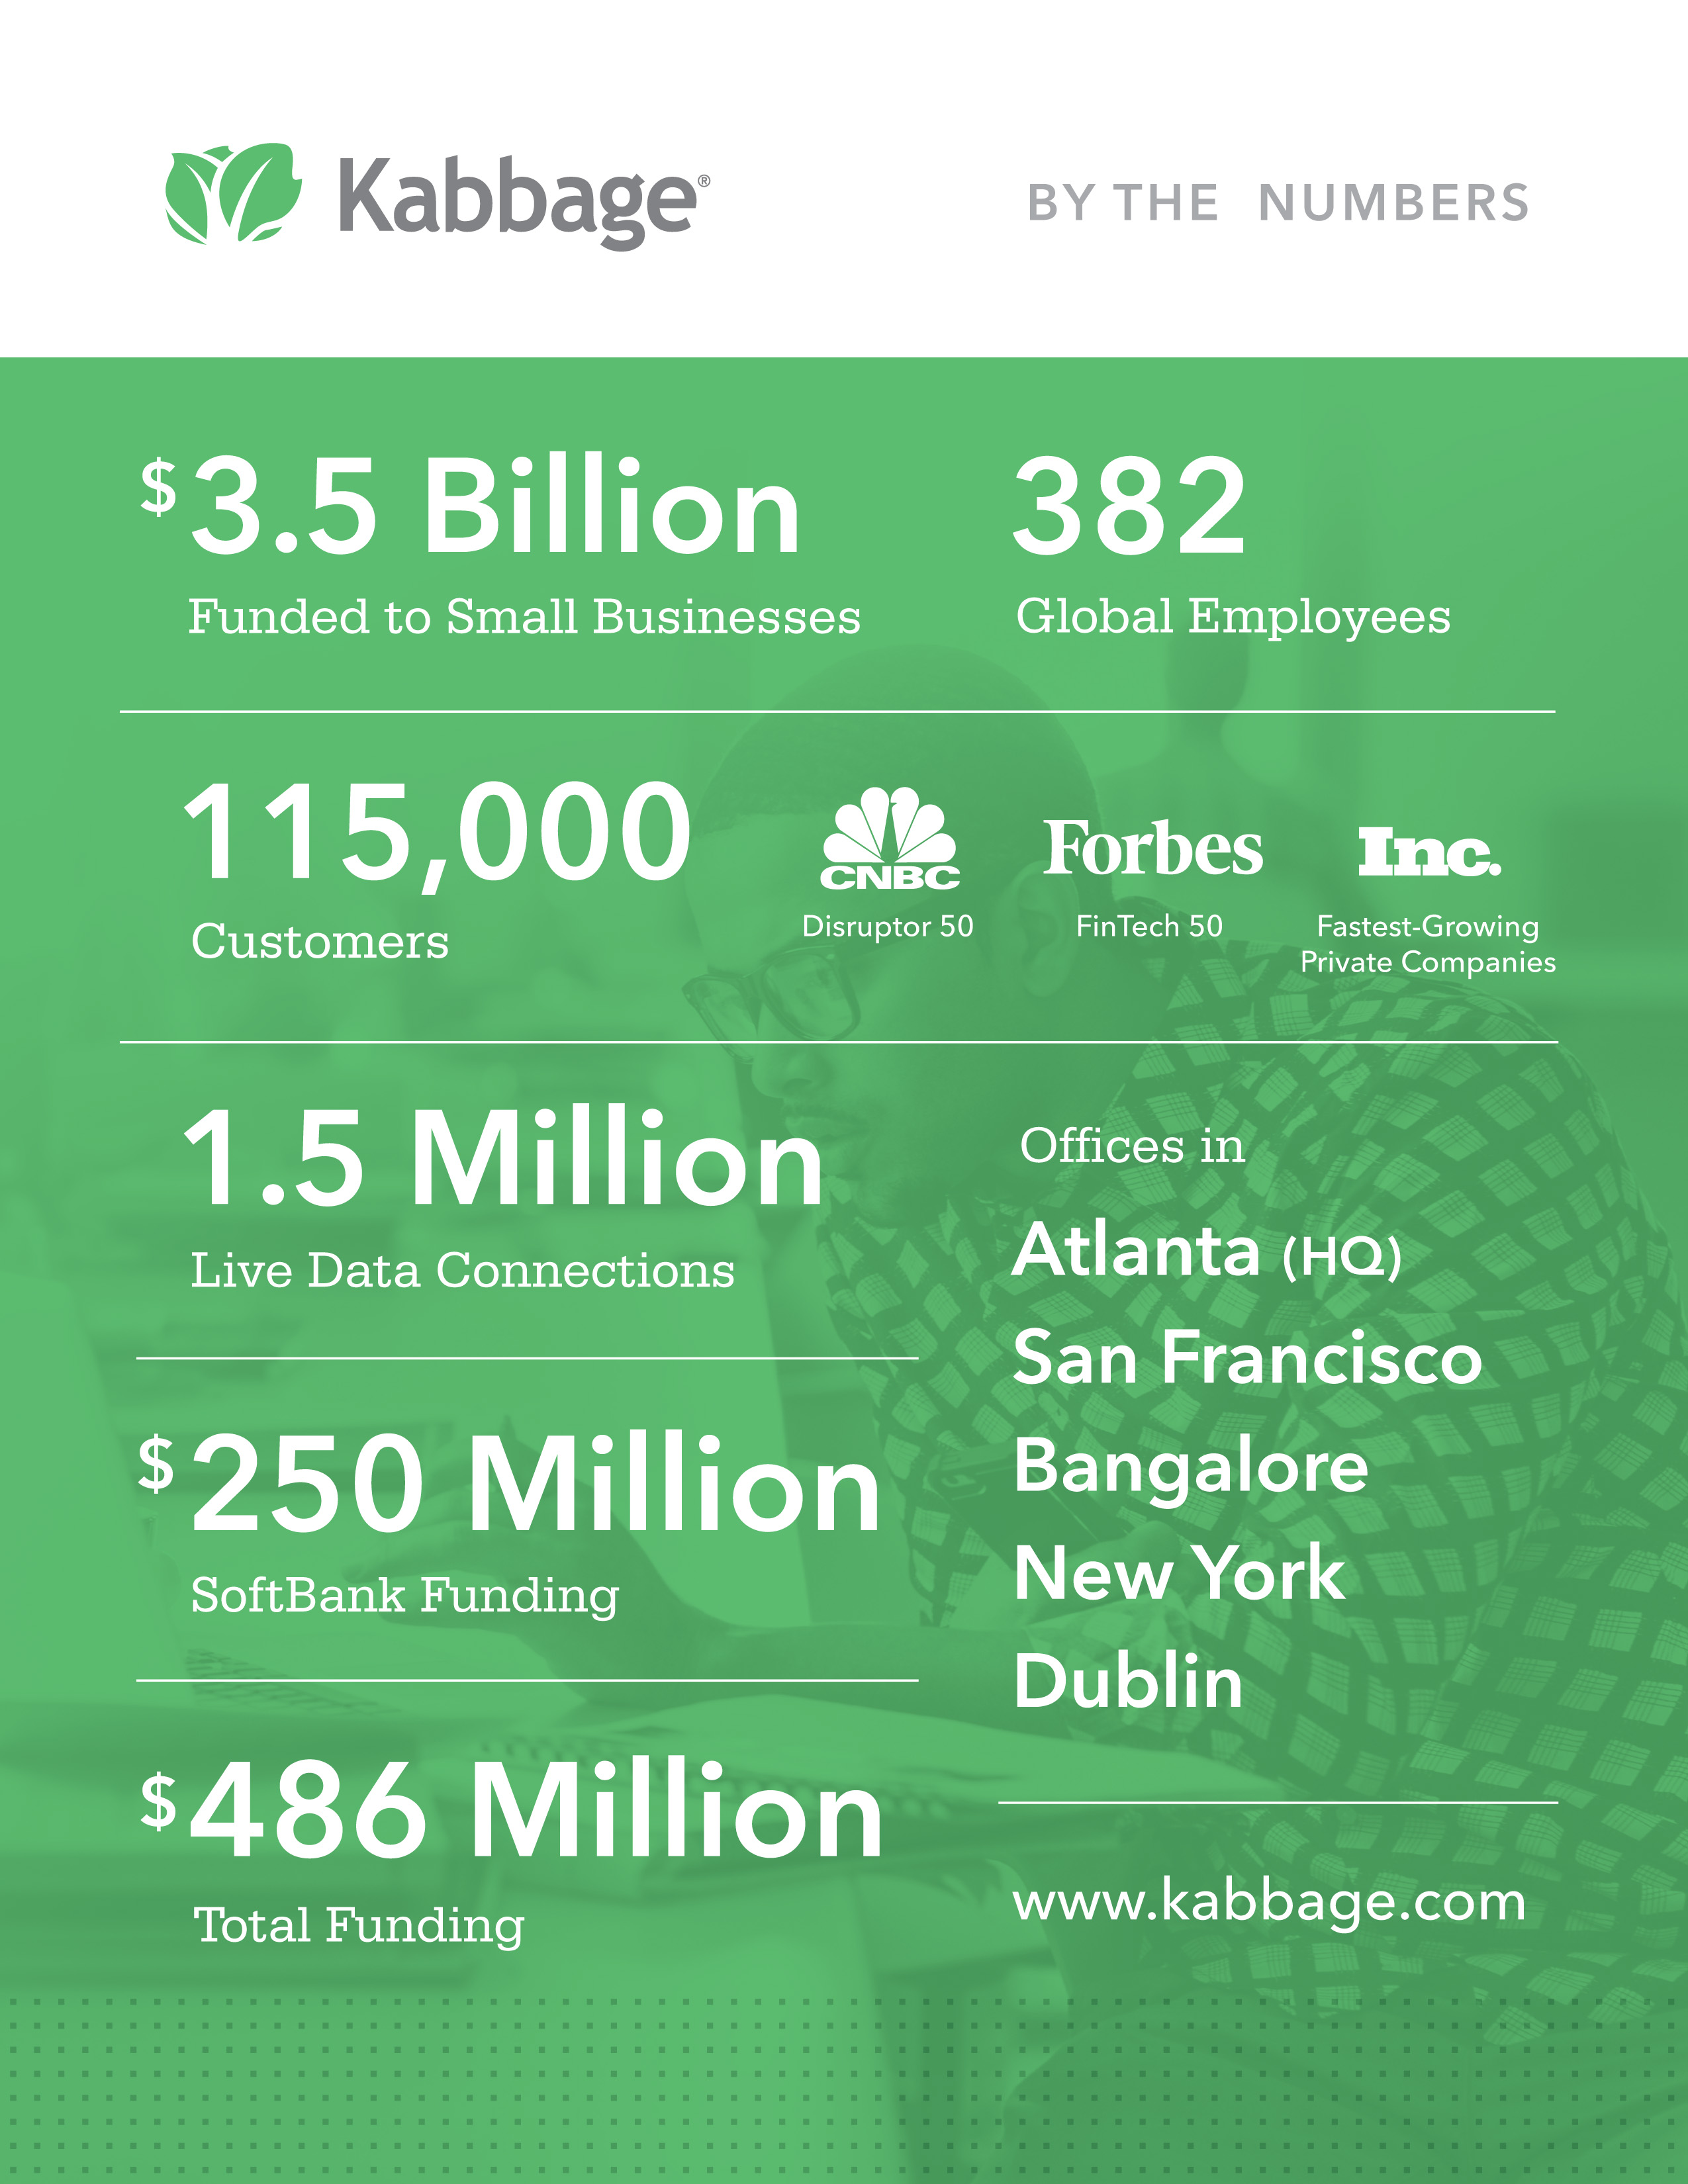 Kabbage Inc.announced the agreement on a $250 million equity investment from SoftBank Group Corp. (“SoftBank”) in Kabbage.